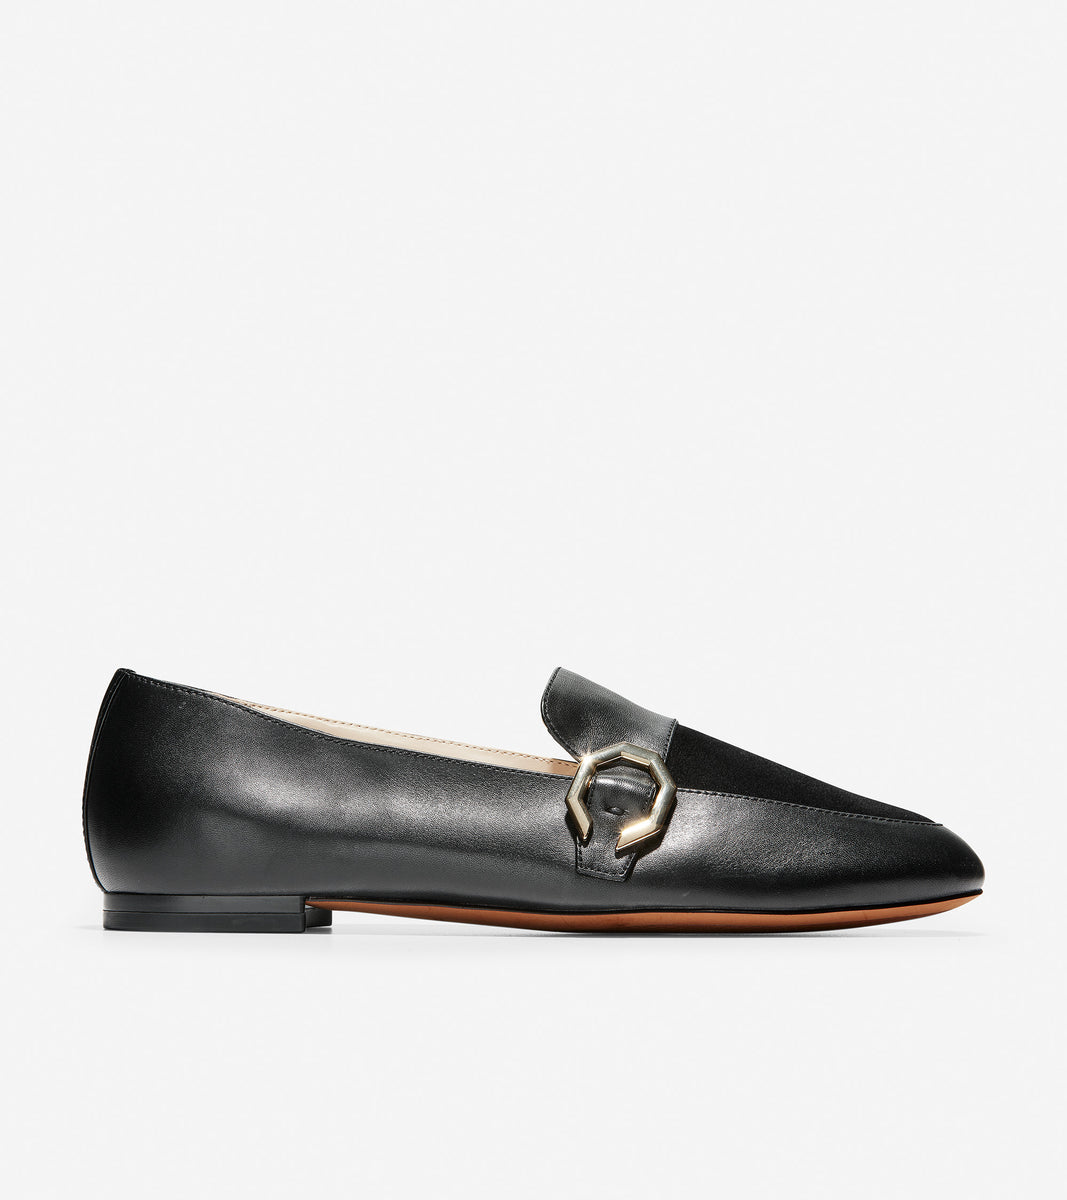 ColeHaan-Teresa Loafer-w15862-Black Leather-Suede